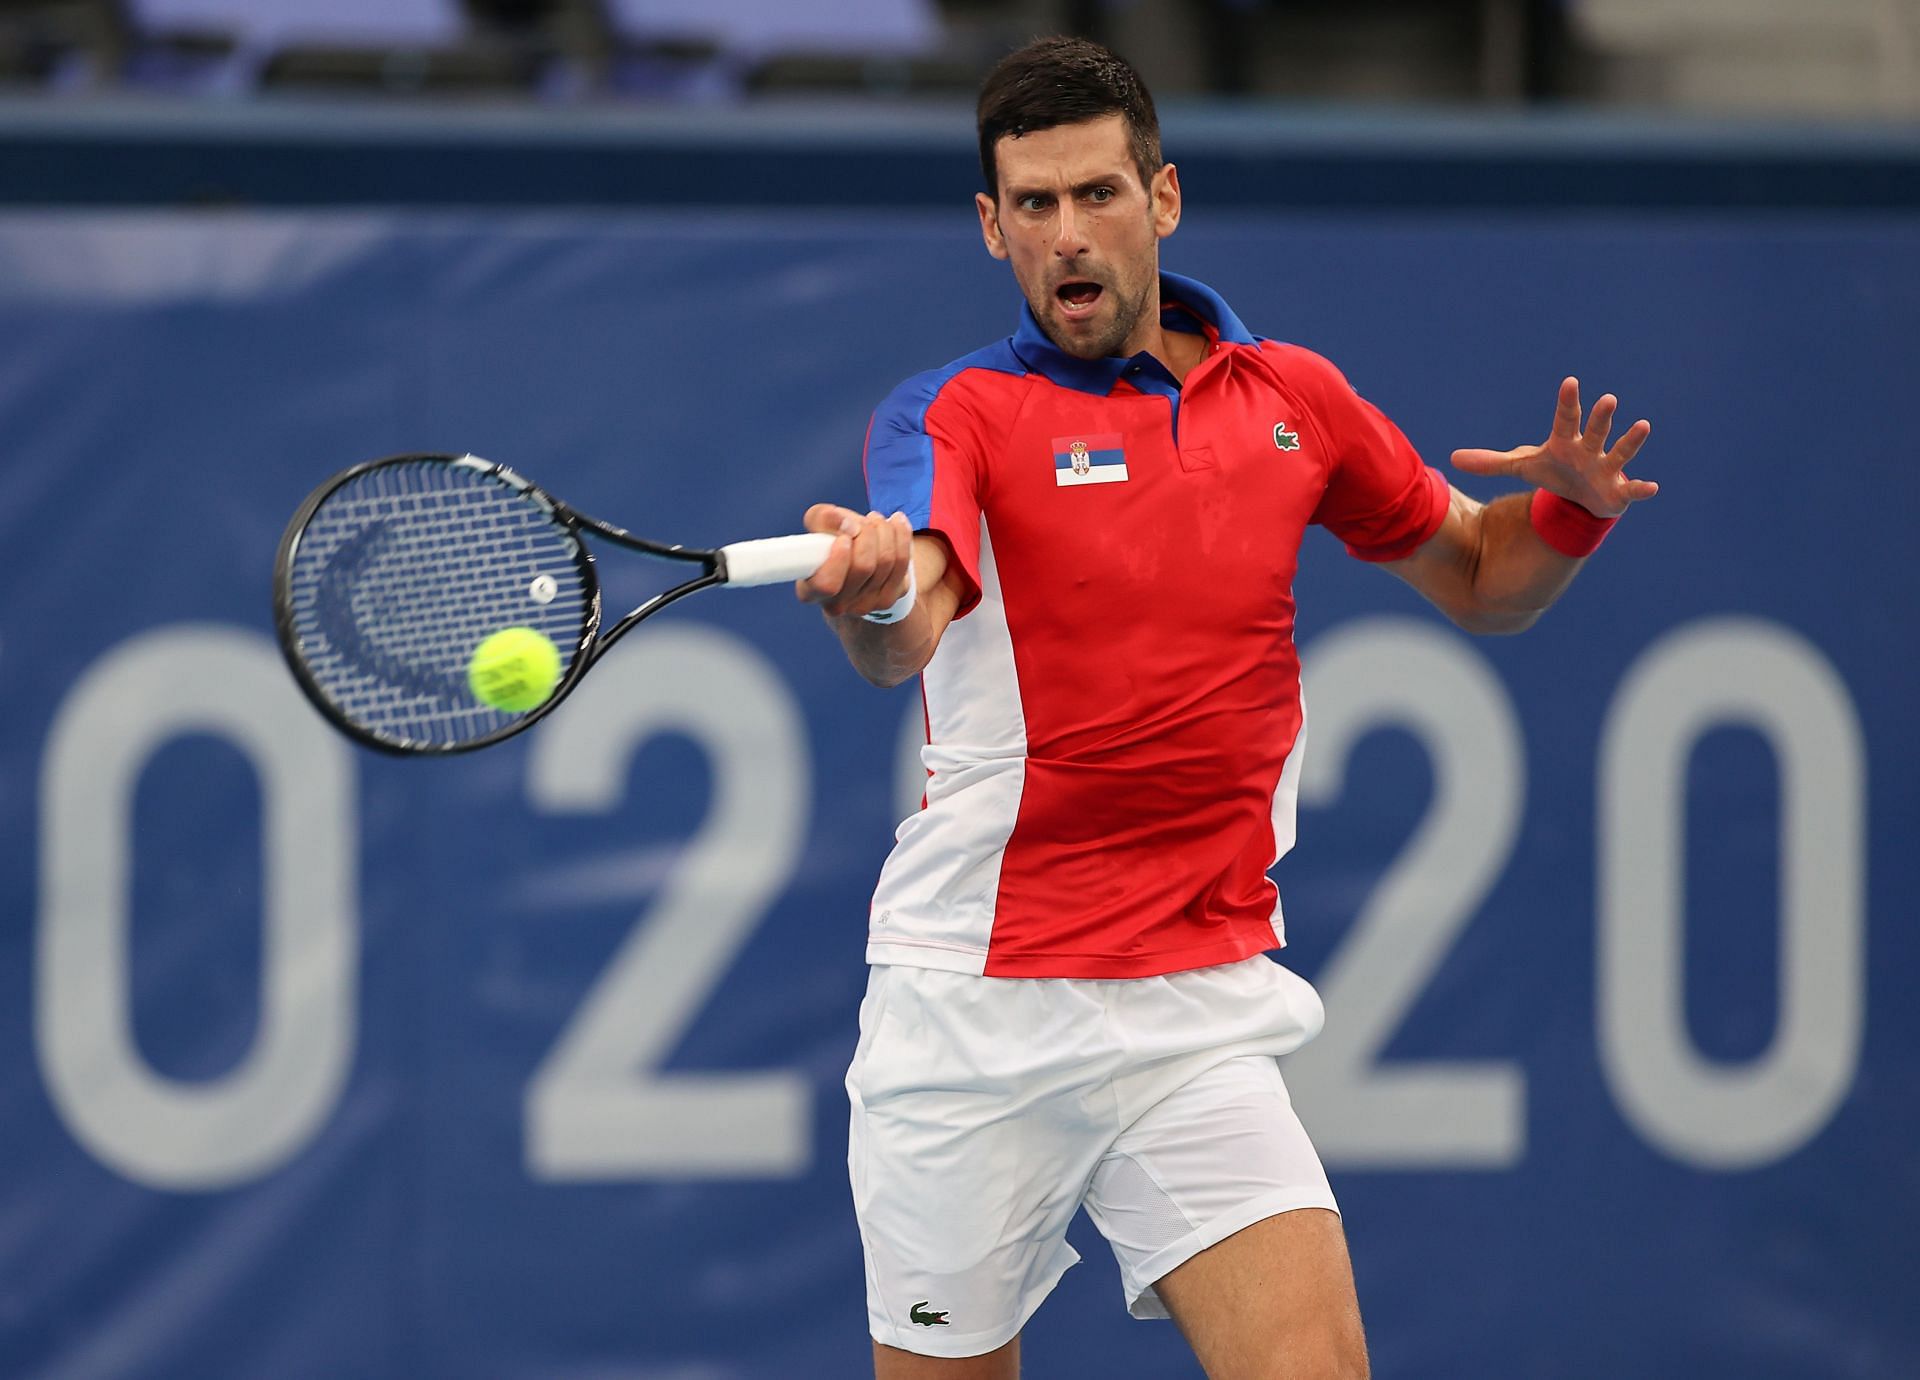 In Pictures: Novak Djokovic shares glimpse of intense training session as he gears up for Paris Olympics 2024